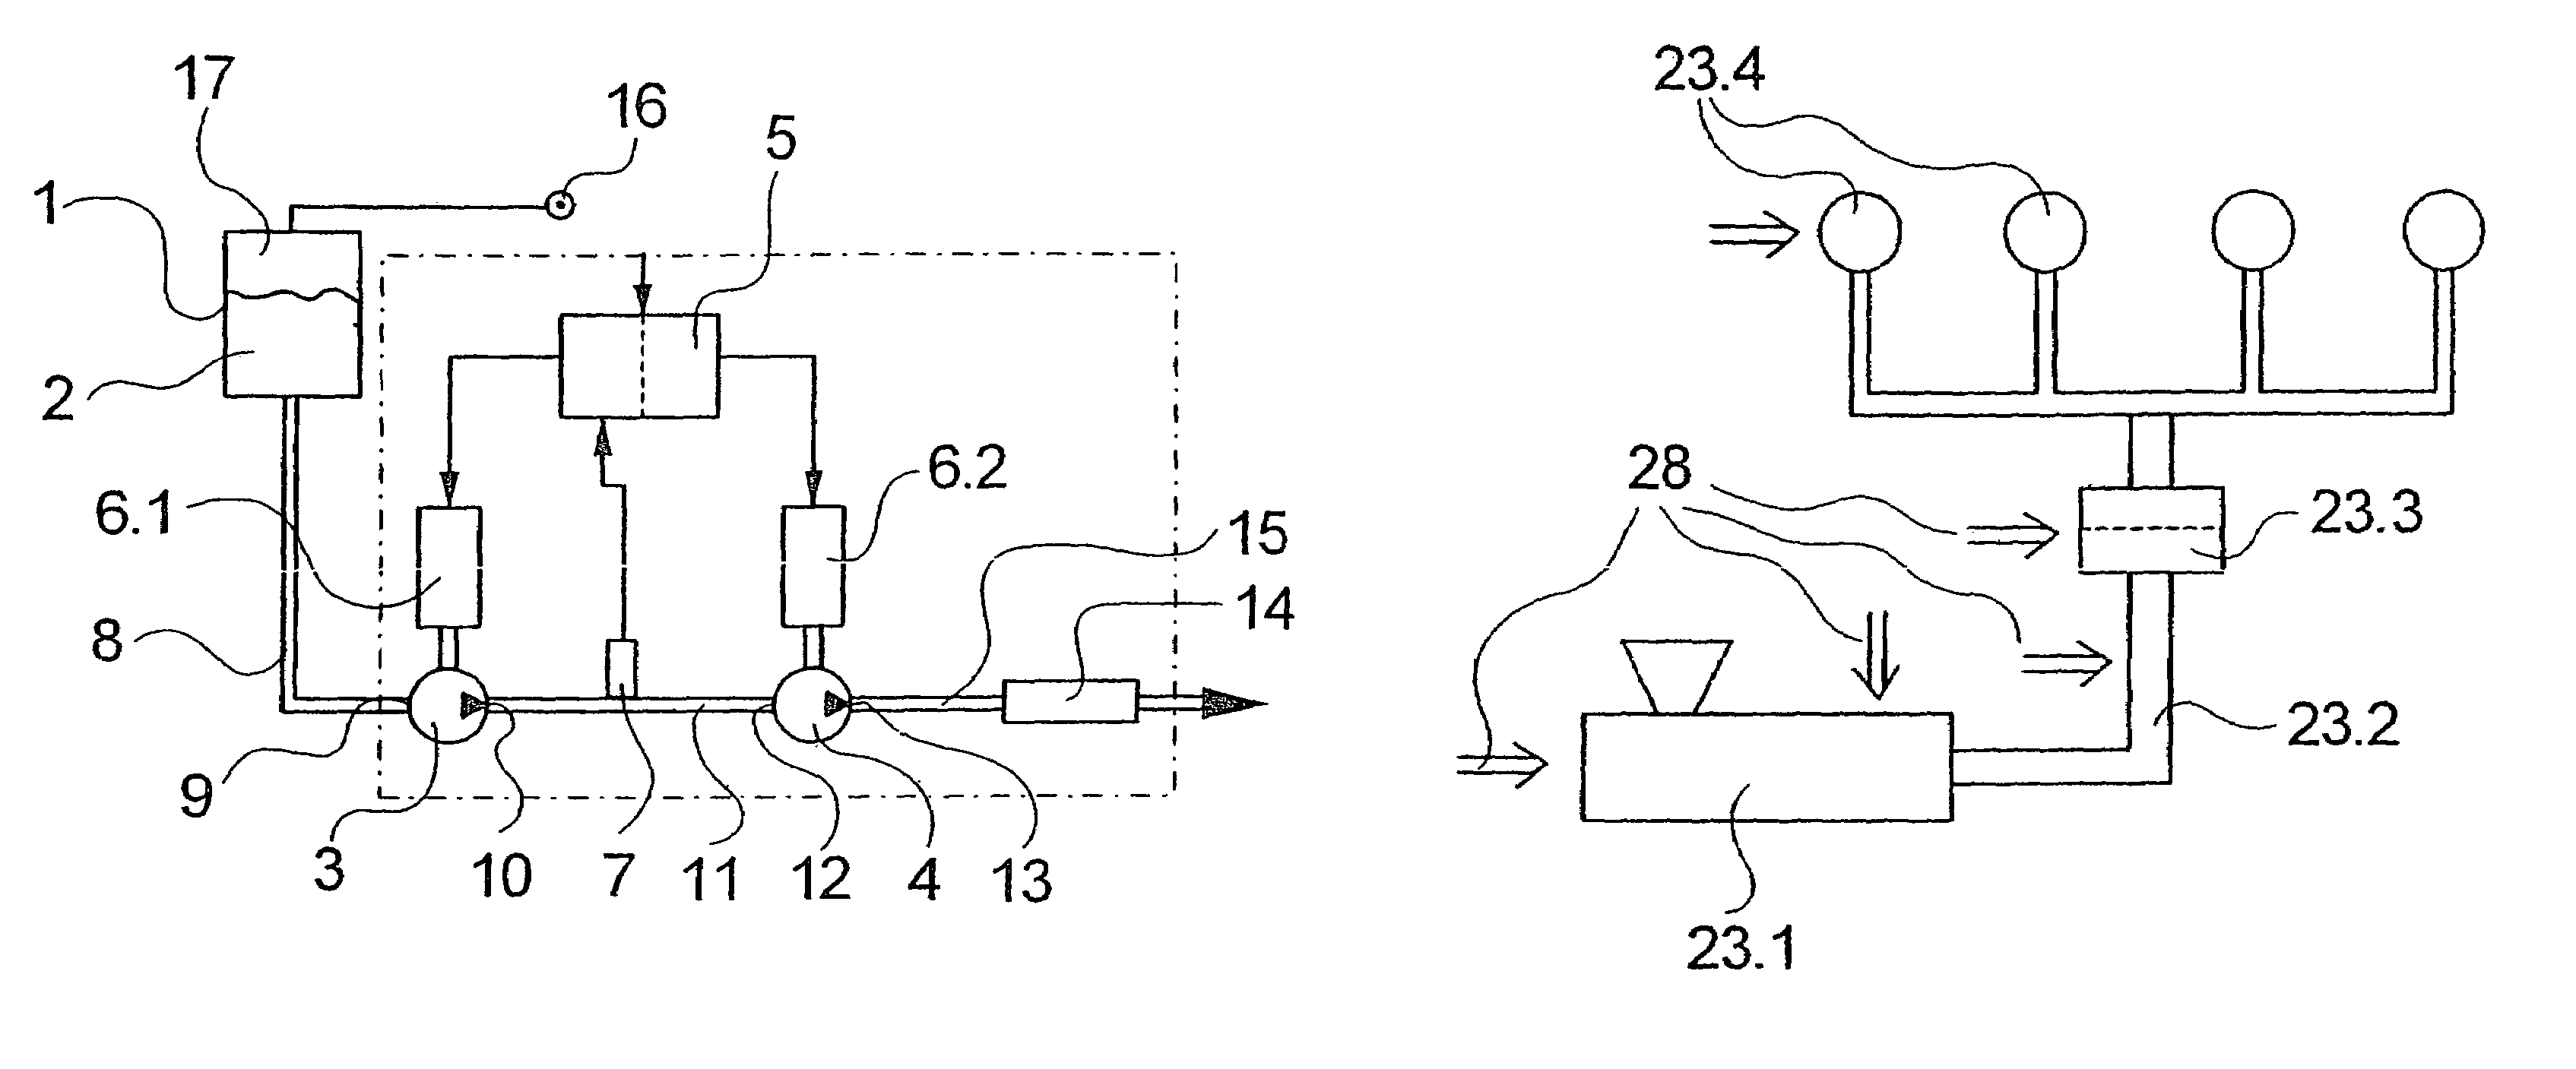 Apparatus and method for injecting a liquid dye into a polymer melt